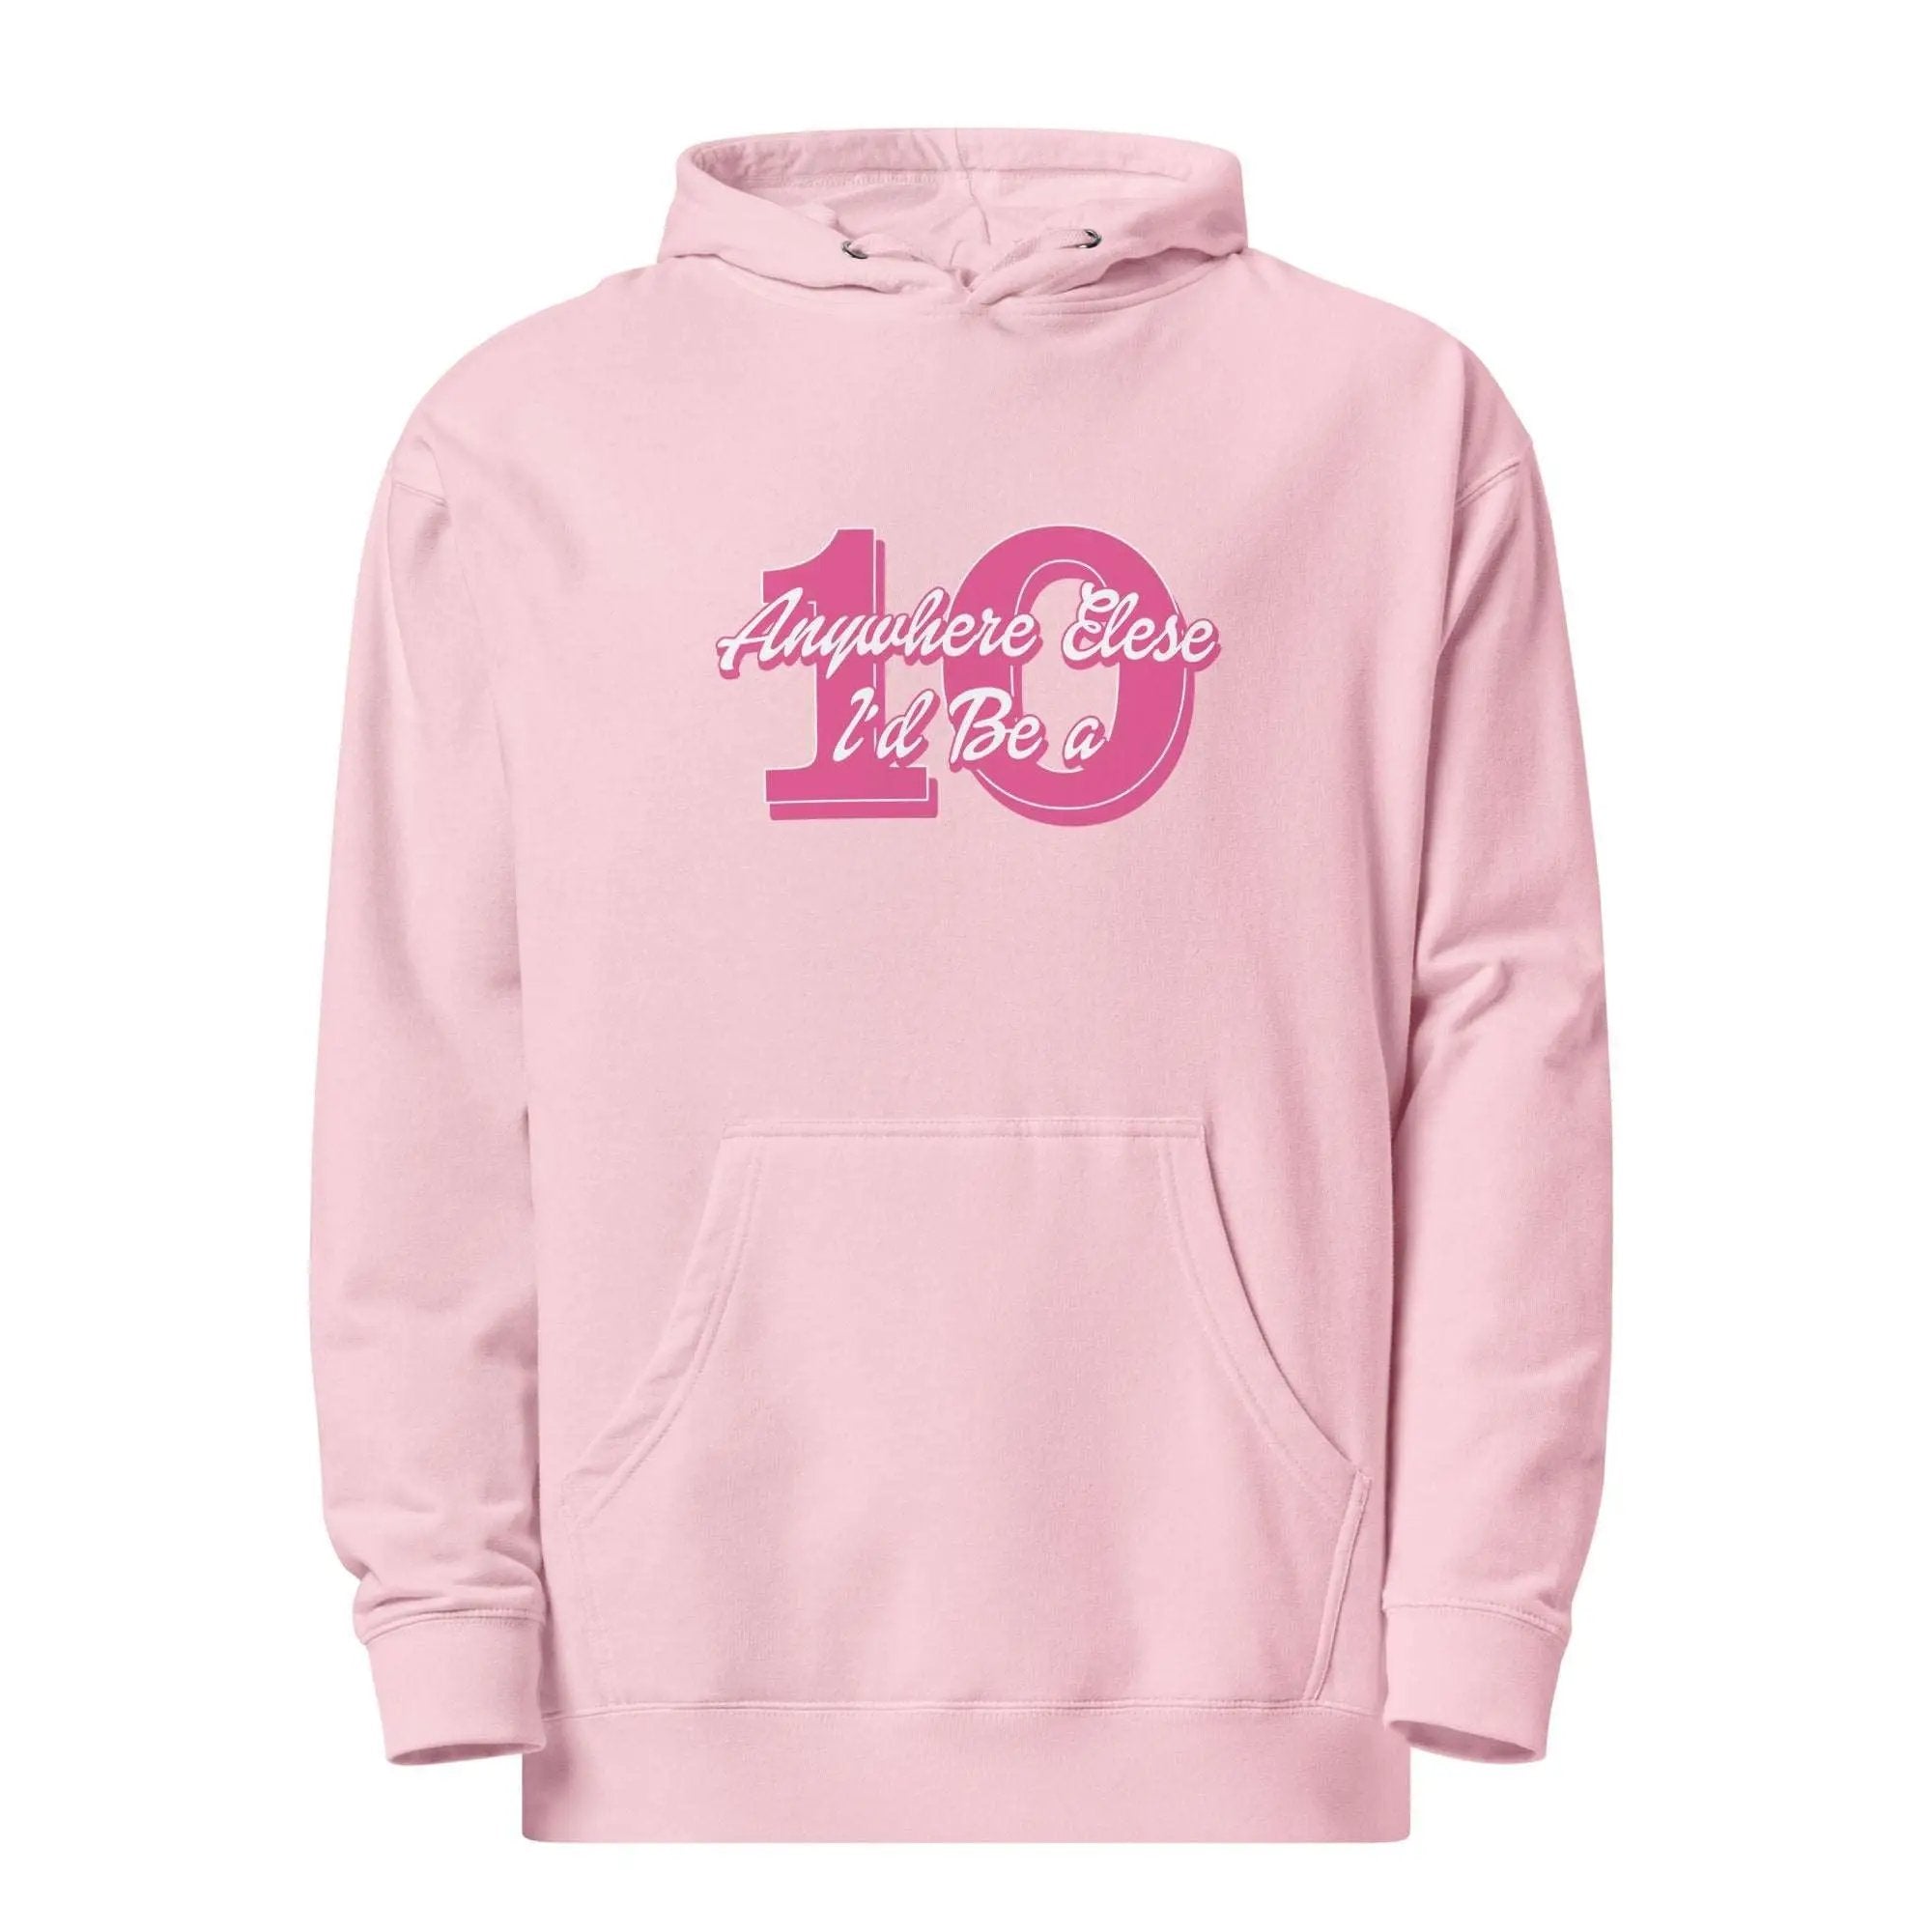 Anywhere Else I’d Be a 10 Unisex midweight hoodie